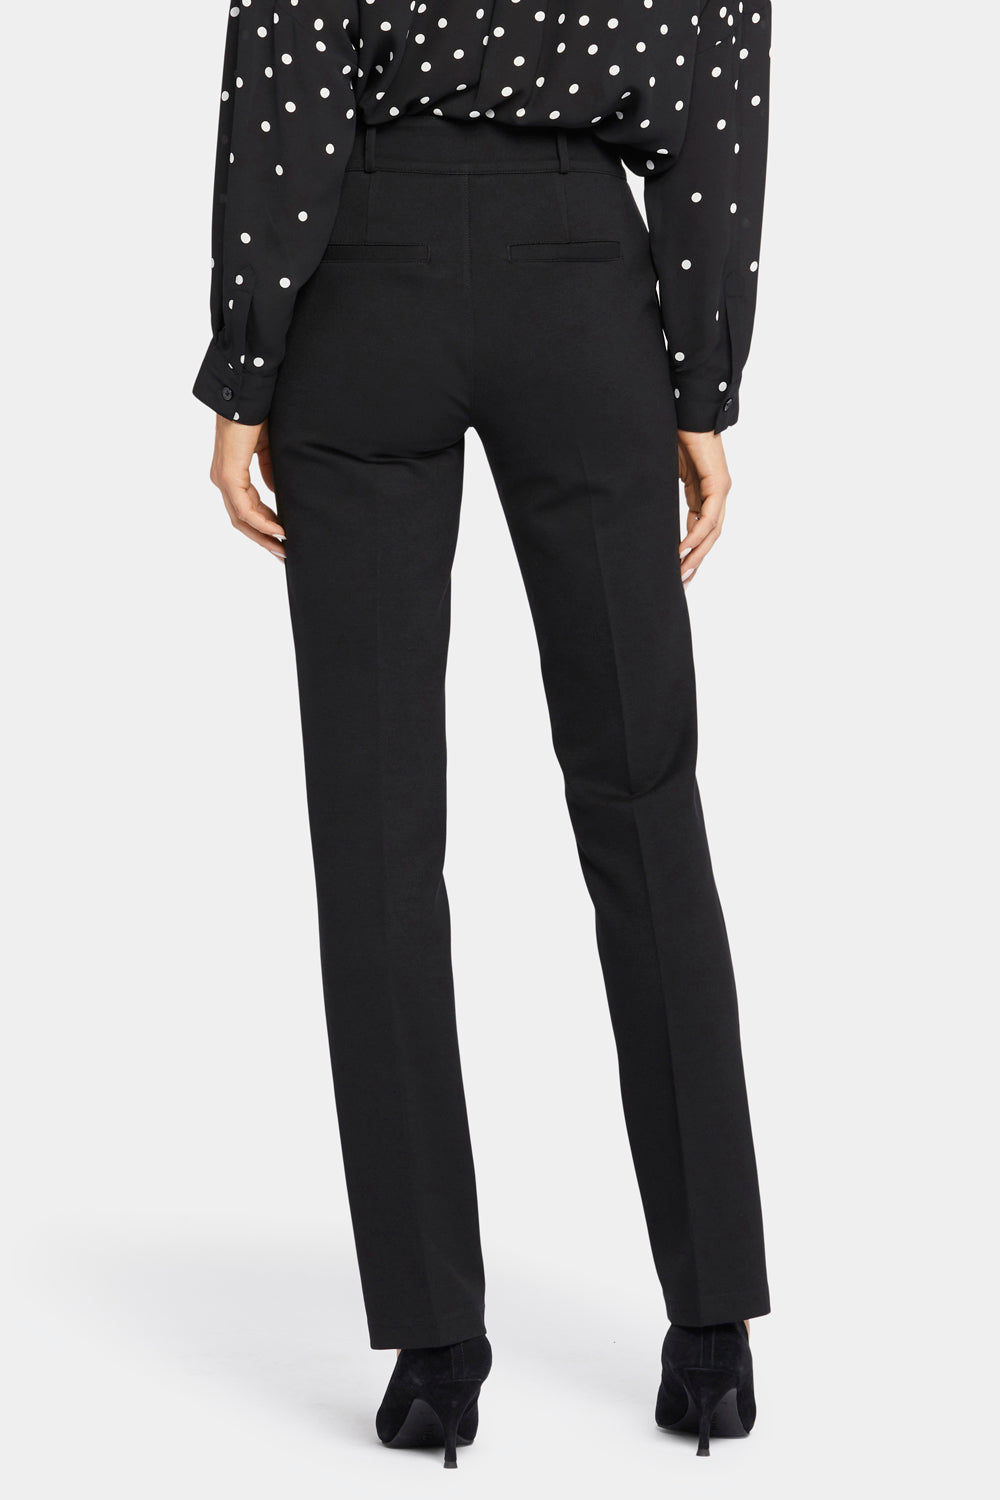 Faux Leather Marilyn Straight Pants Sculpt-Her™ Collection - Black Black |  NYDJ